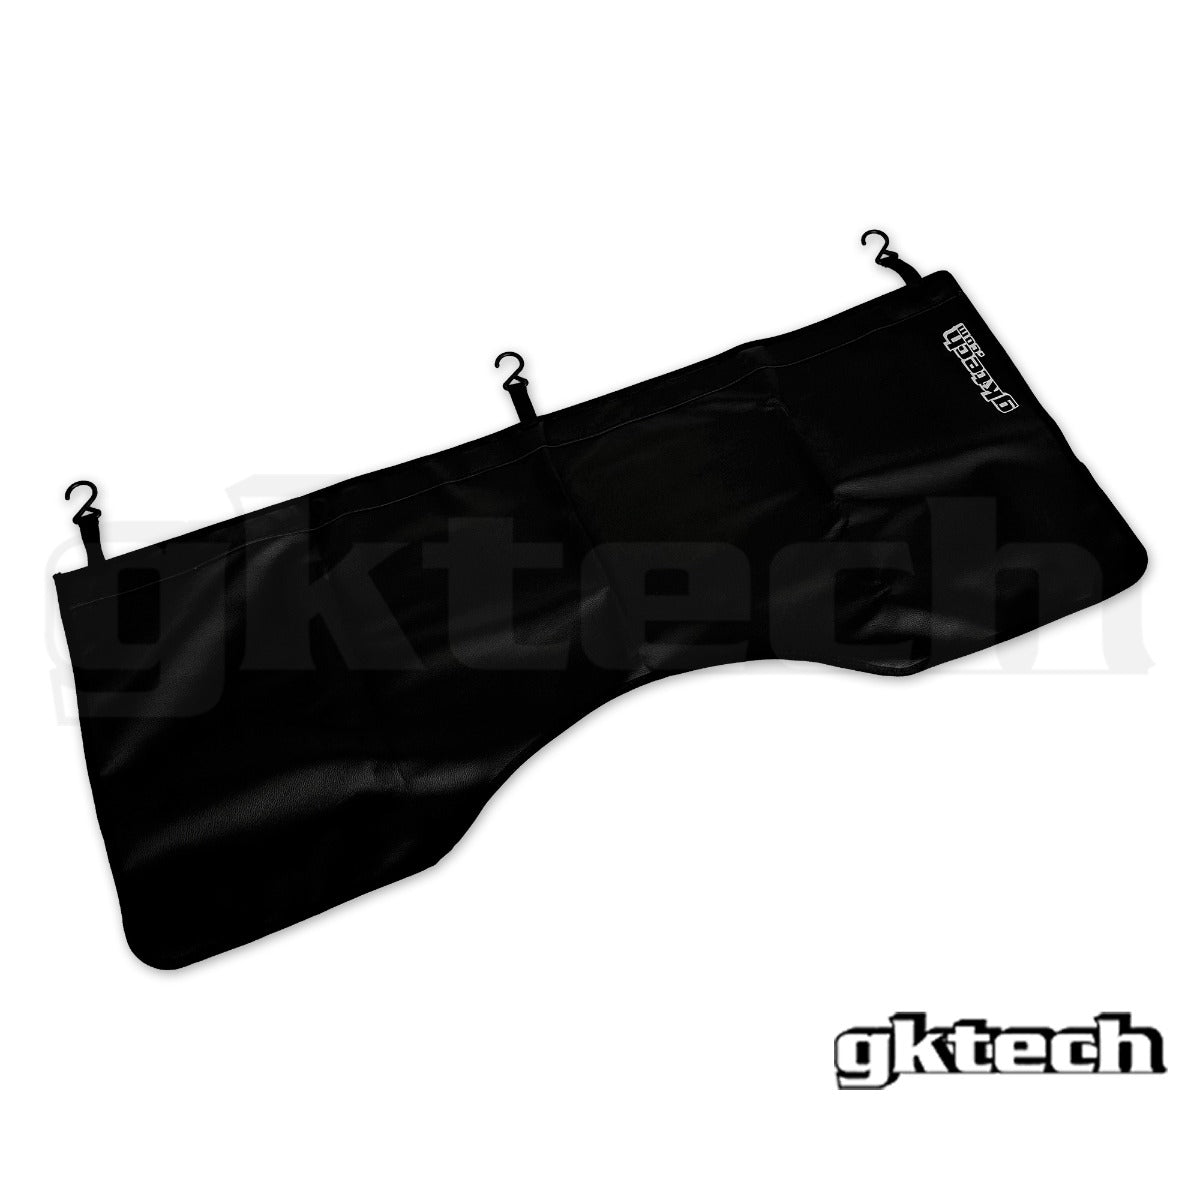 GKTECH branded guard protector